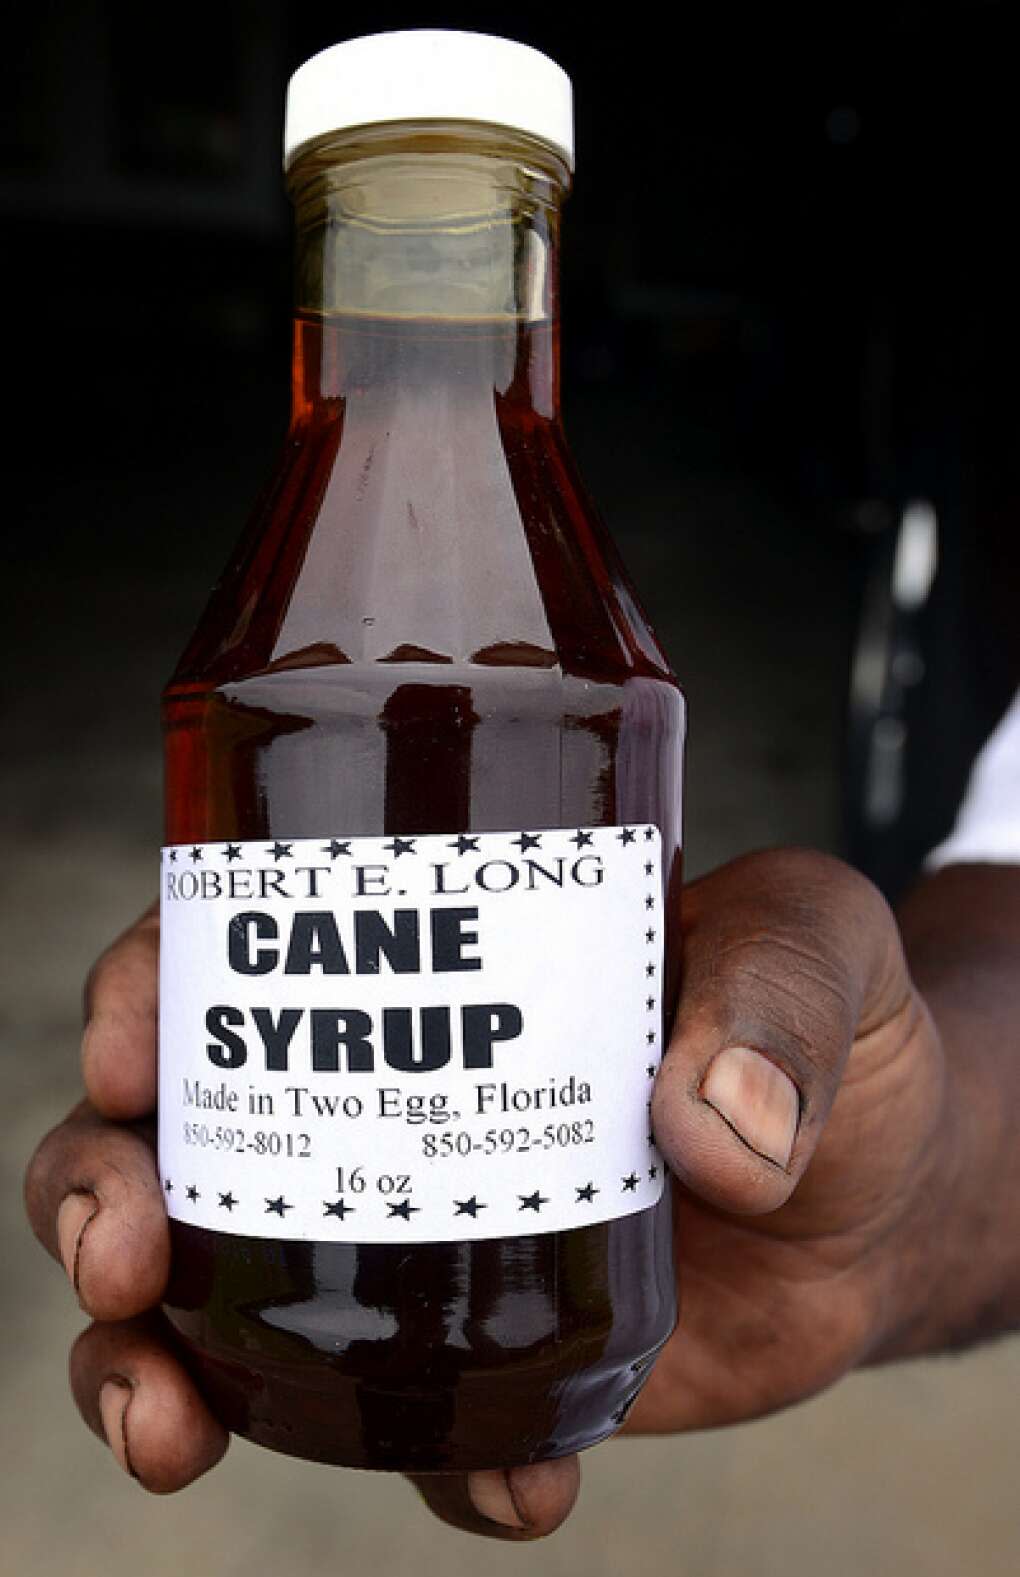 a bottle of cane syrup made in Two Egg